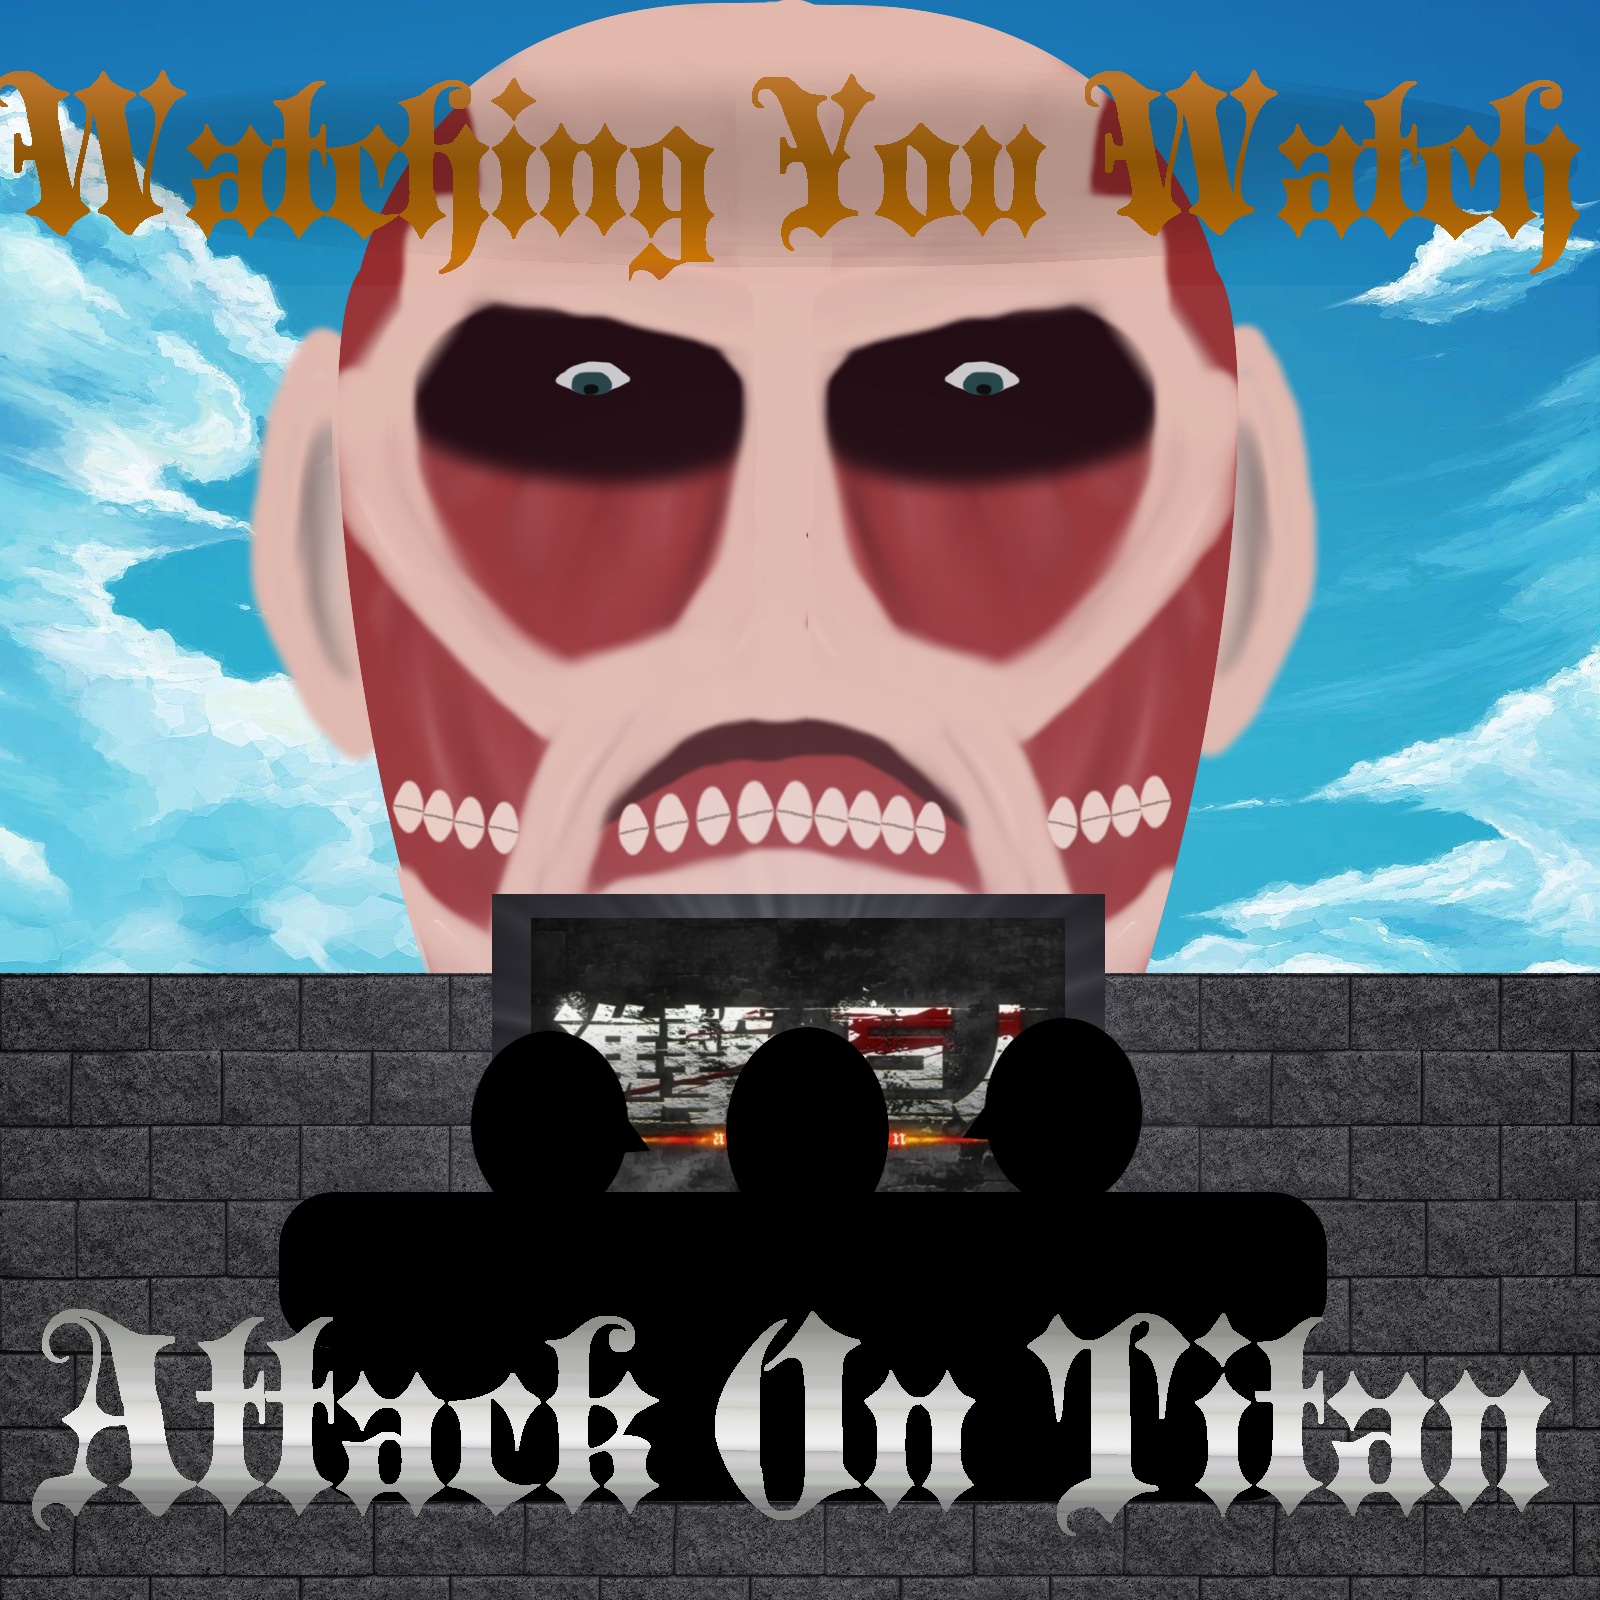 WYW AOT  Episode 5: The Power of Friendship! (and Death)